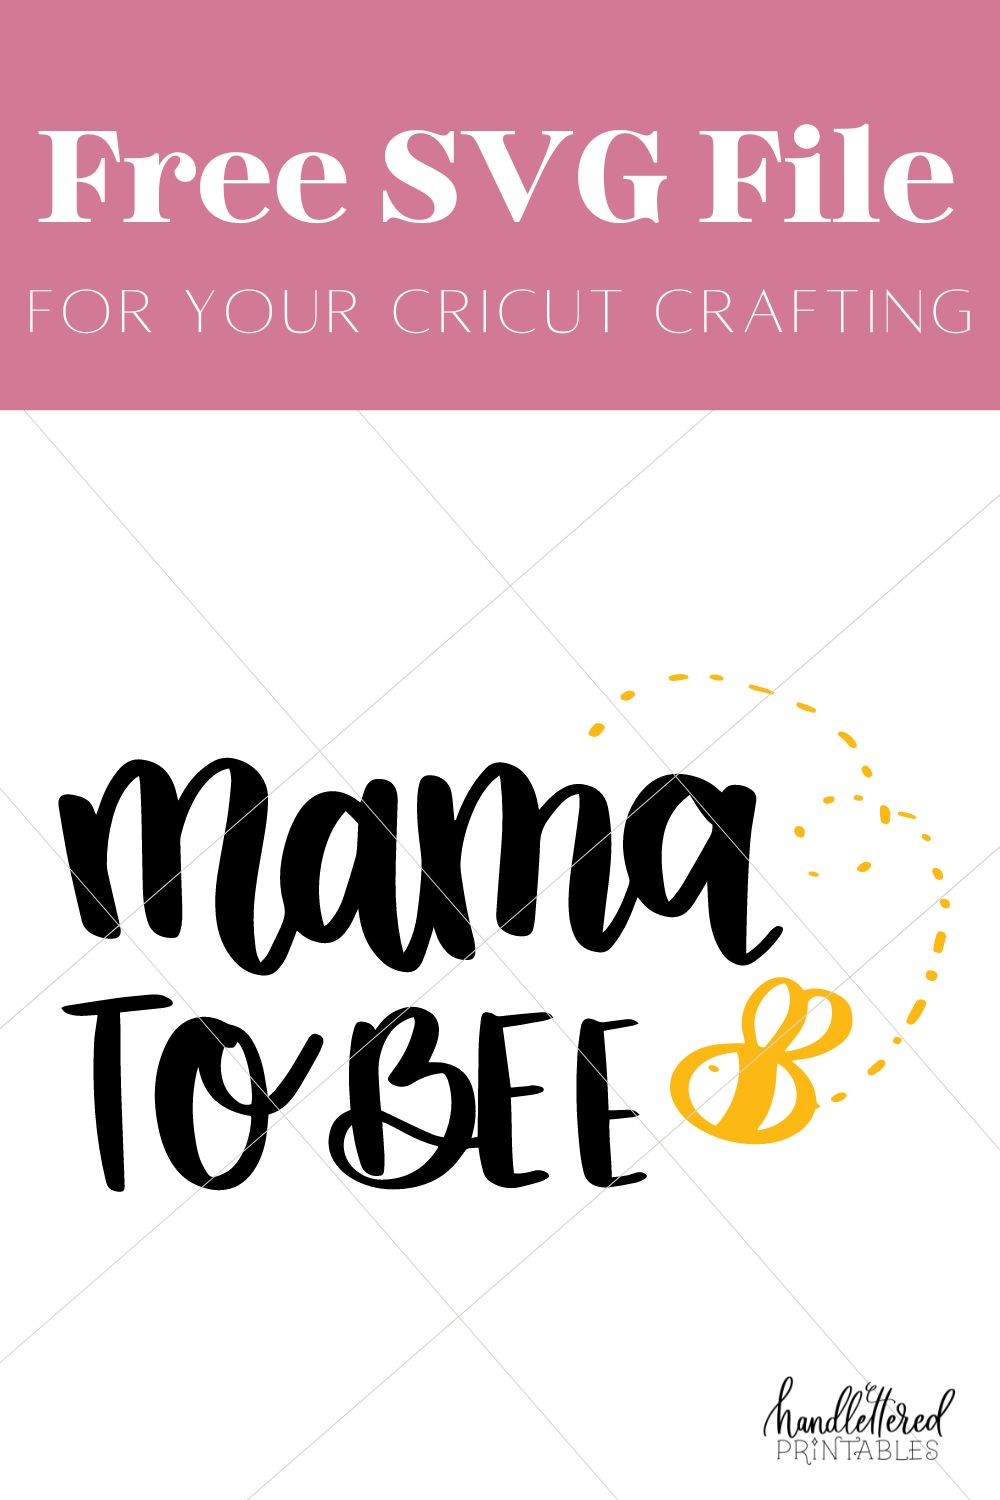 Mama to bee hand lettered design in black brush lettering with yellow illustrated bee, text title reads: free svg file for your cricut crafting